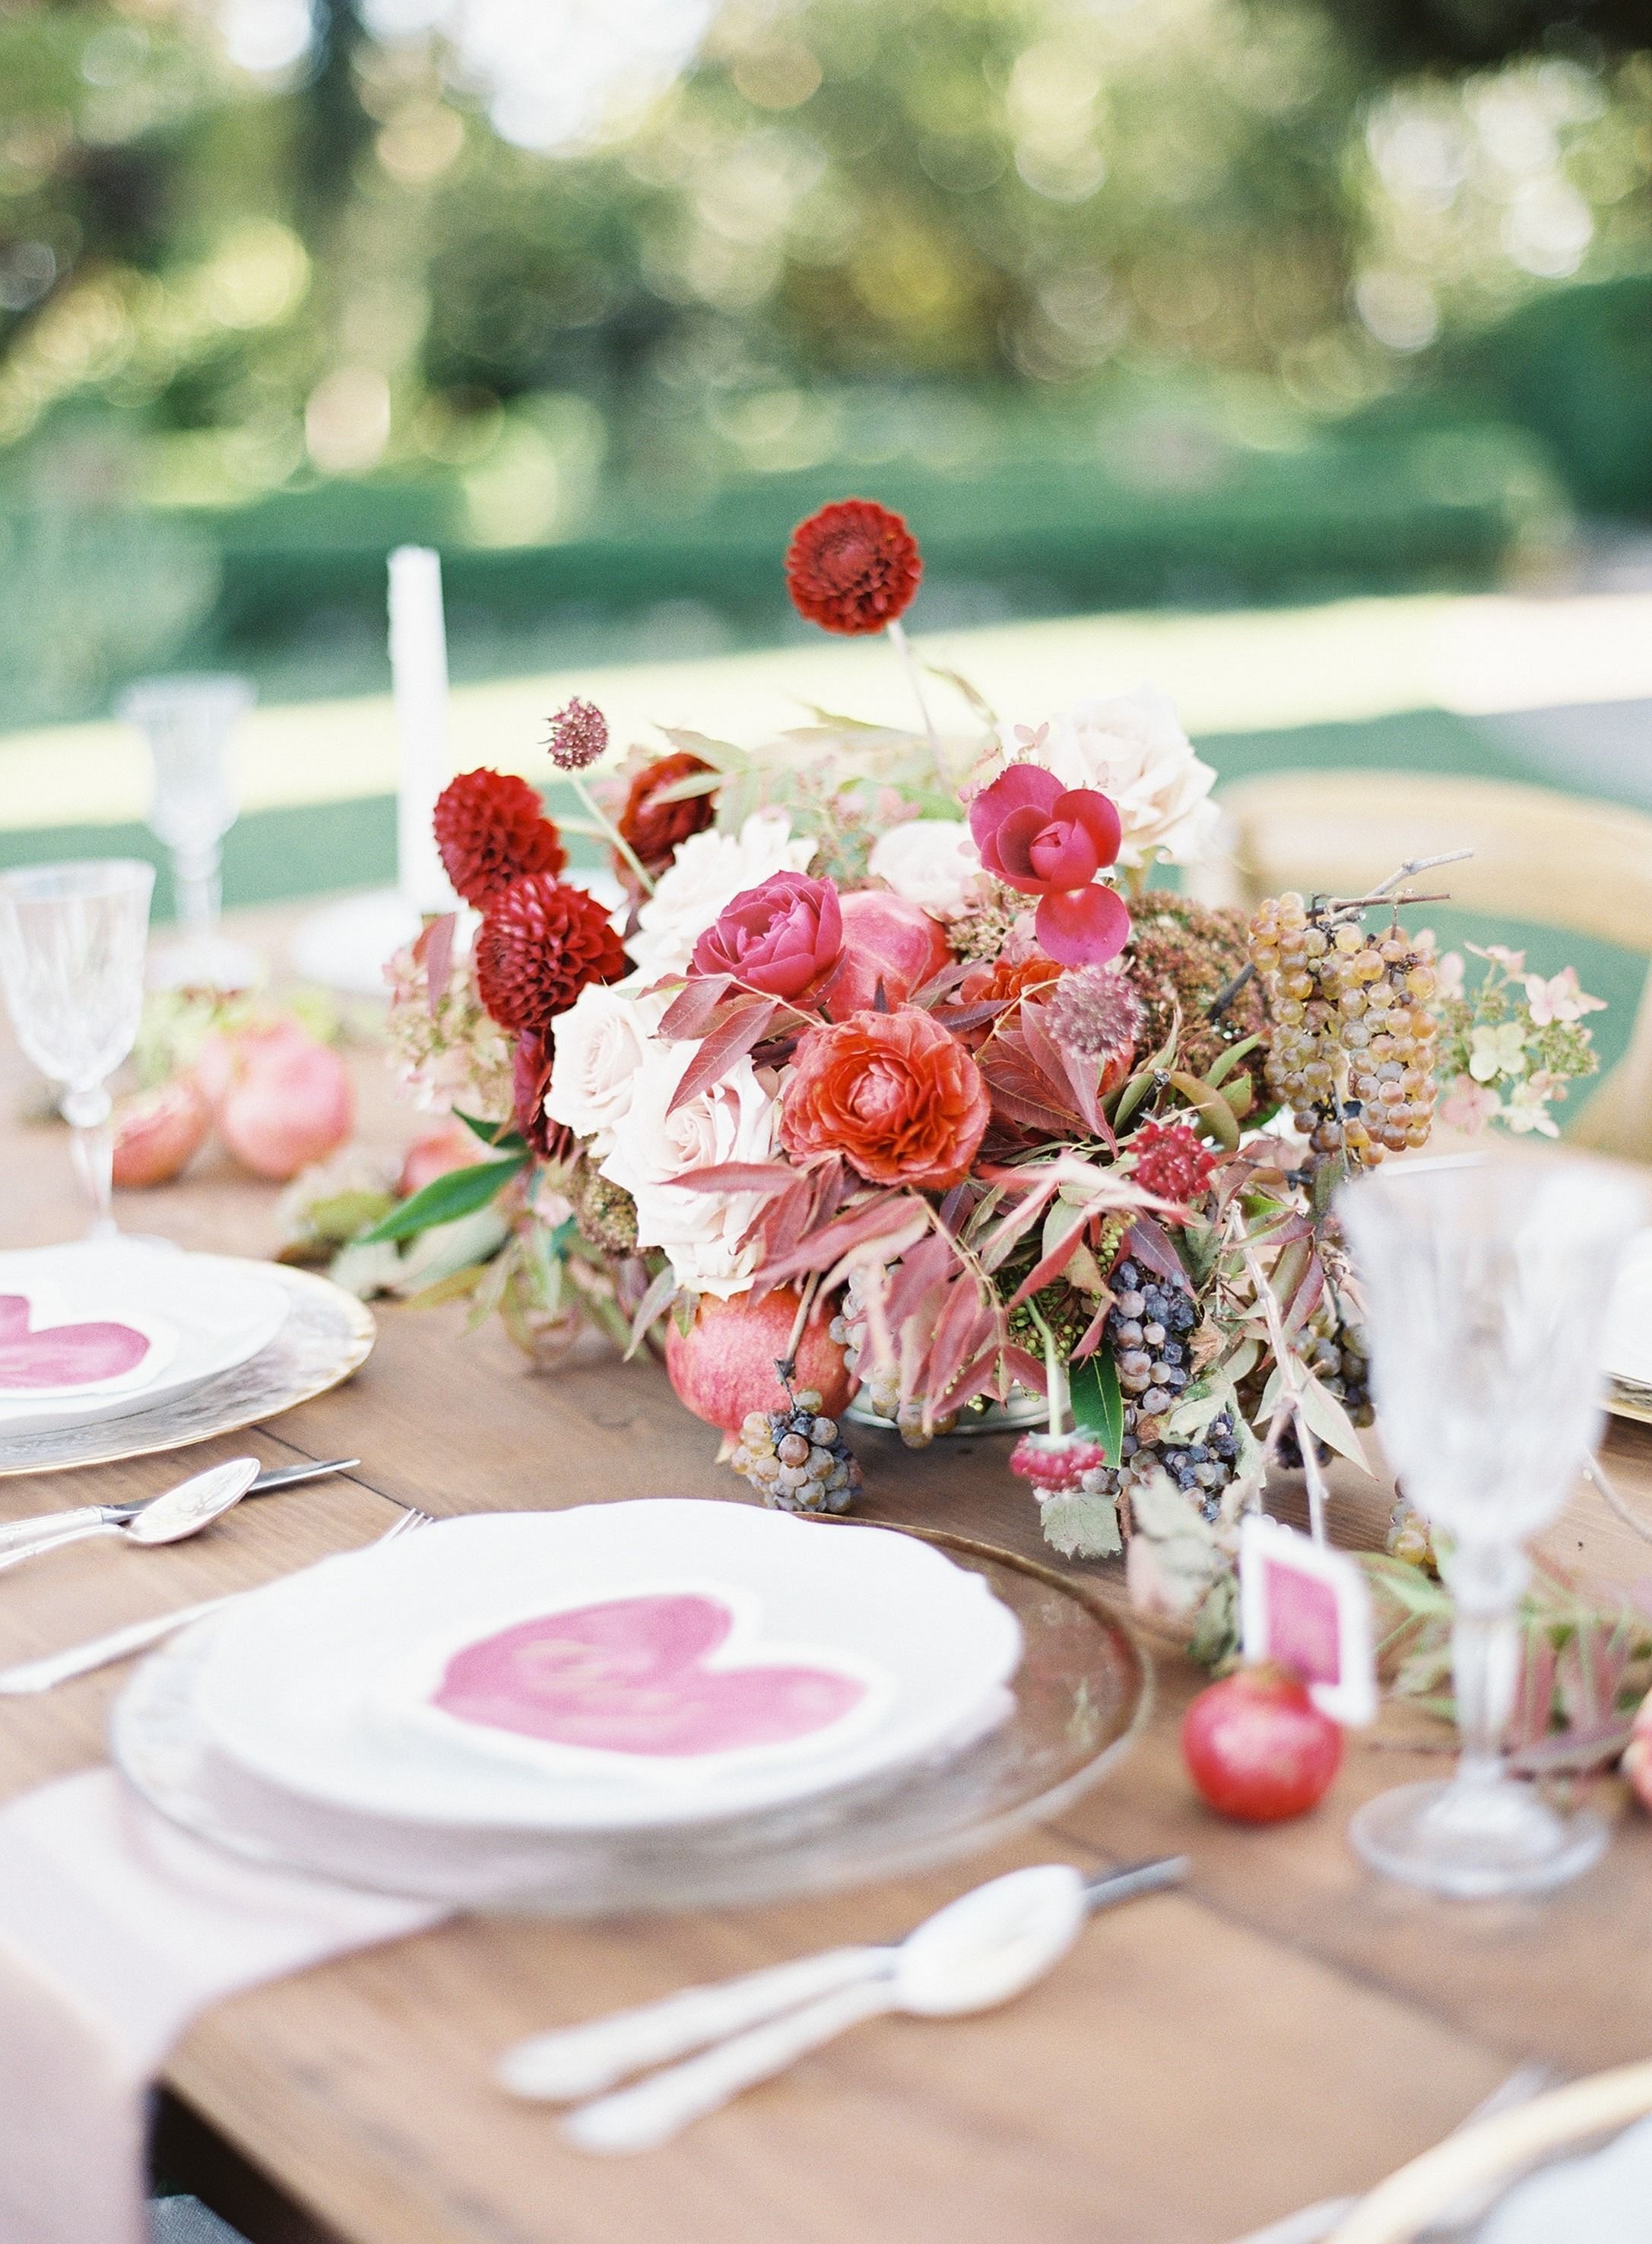 Wedding table settings from stylemepretty